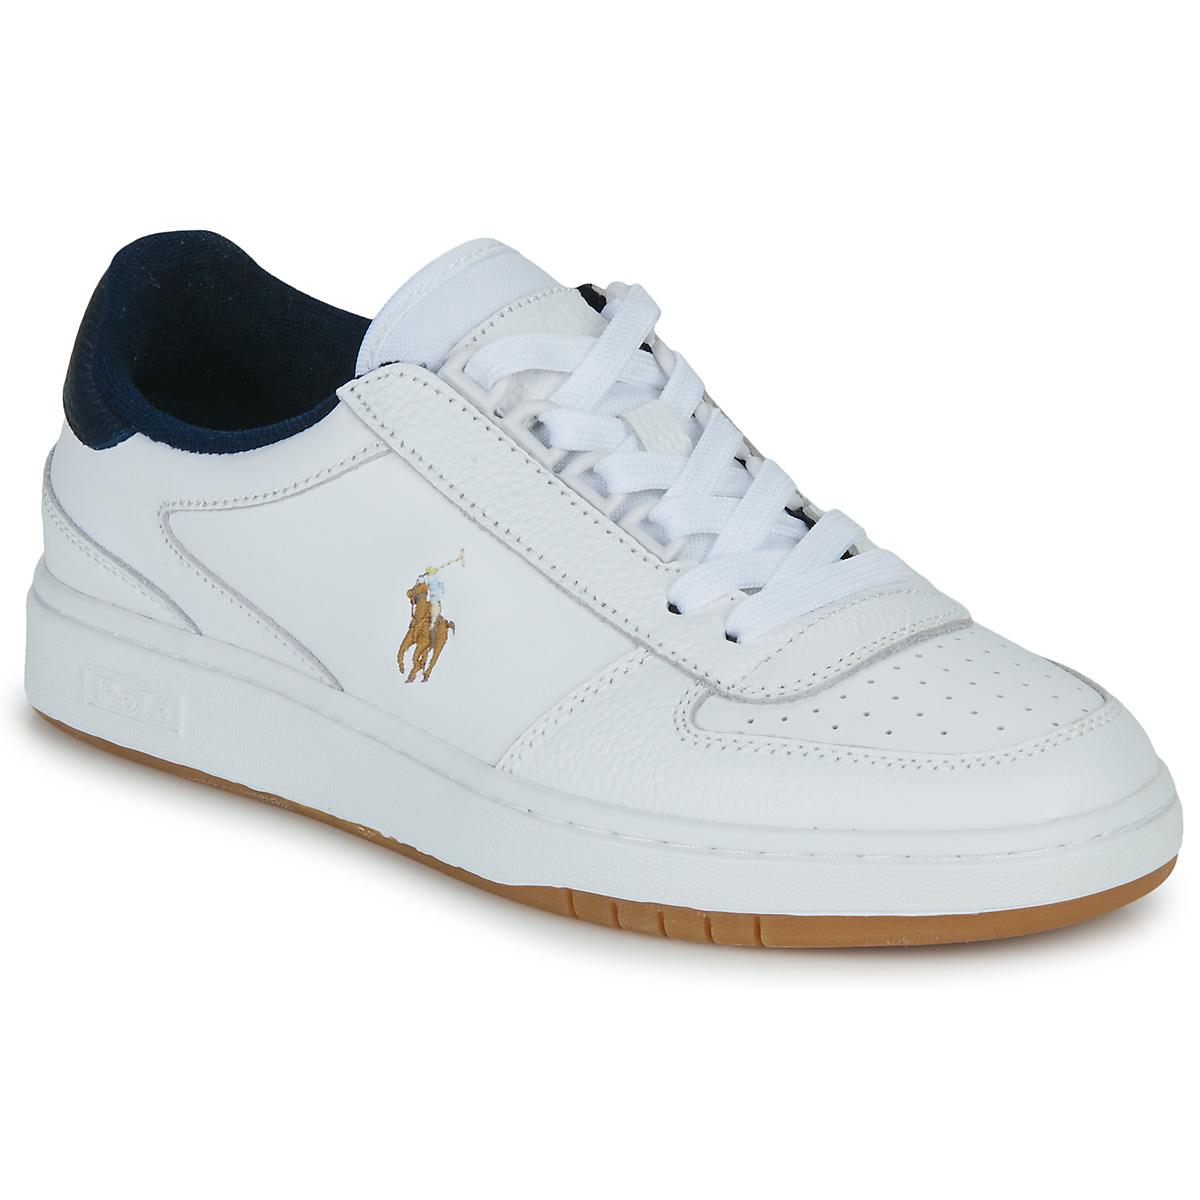 Polo Ralph Lauren Shoes for Elevating Your Style